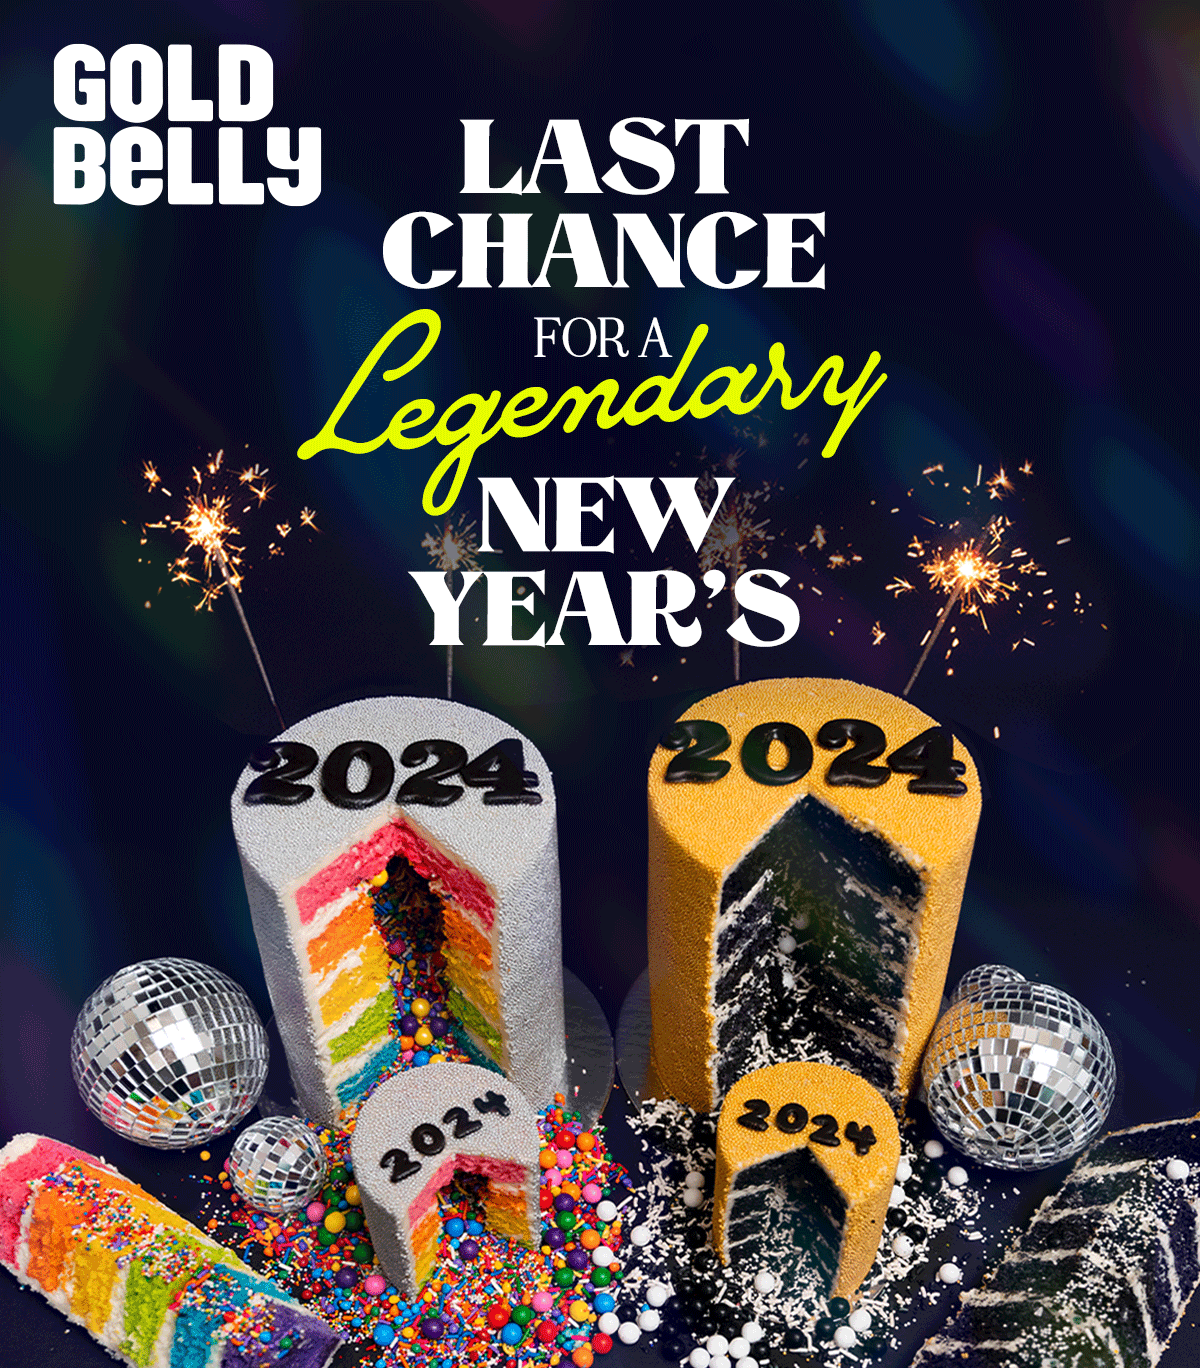 Last Chance for a Legendary New Year's